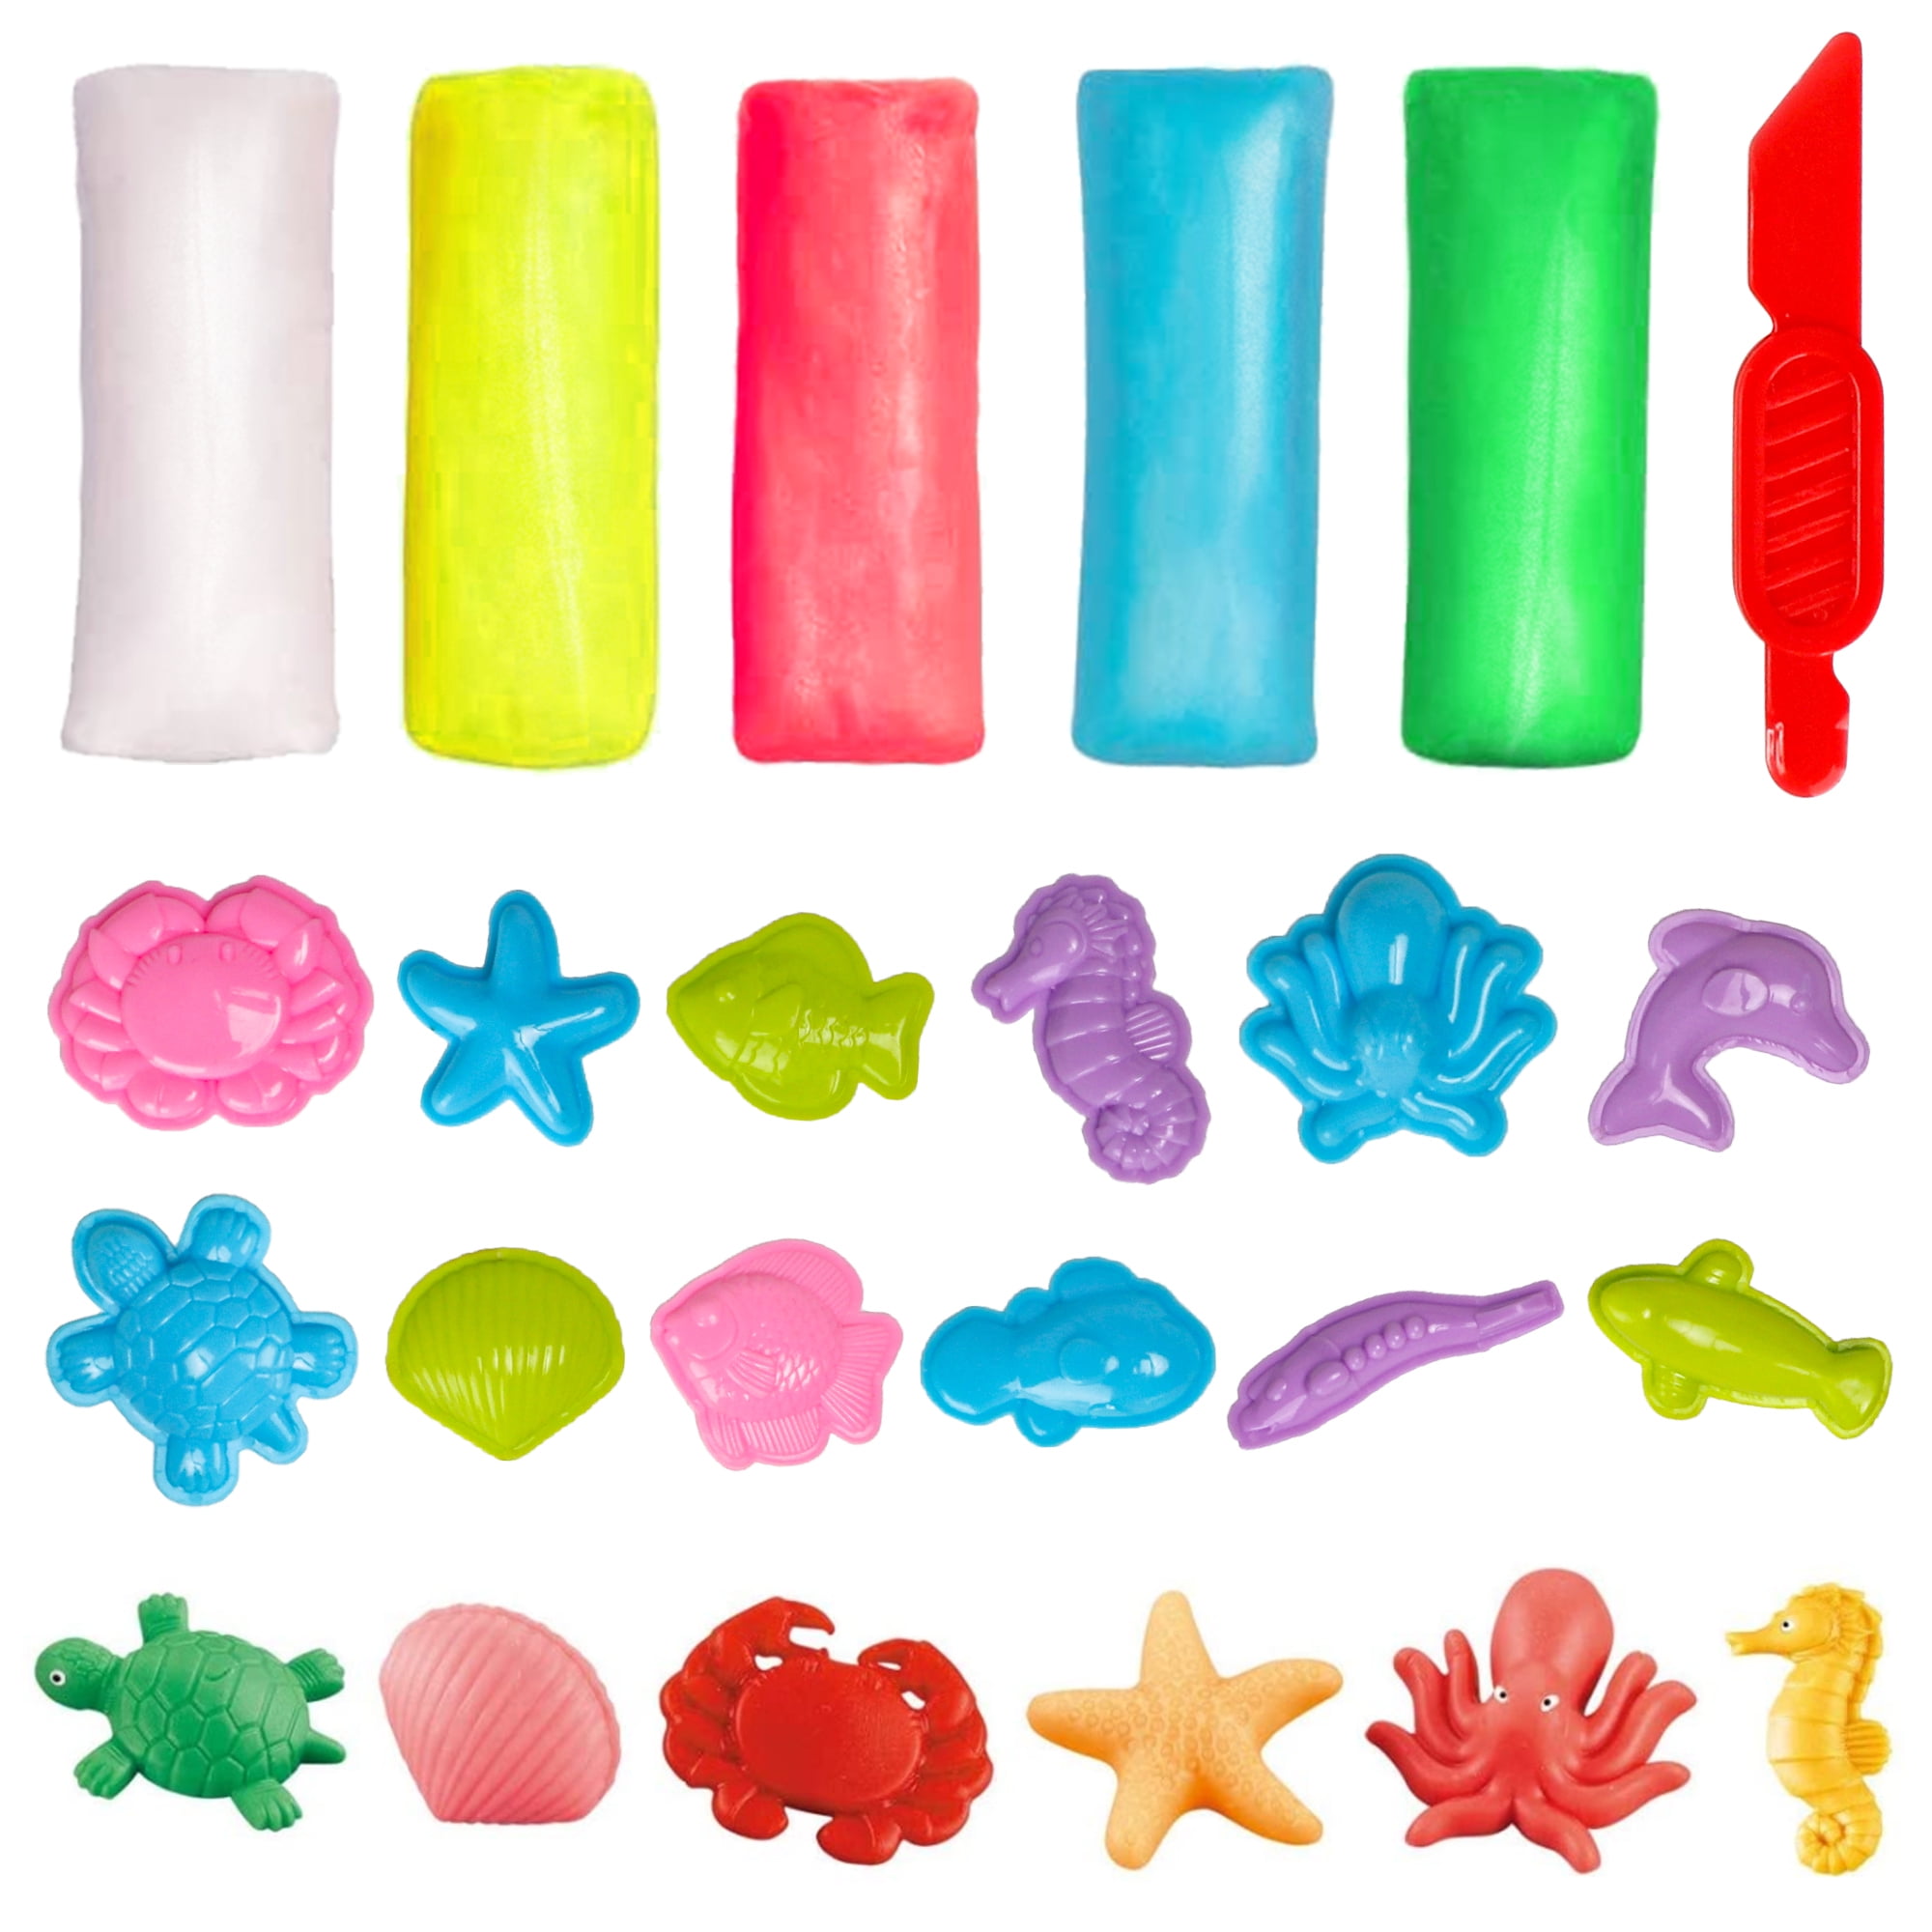 Original Soft Clay for Slime - Modeling Clay Art Supplies for Kids - Add to  Glue and Foam to Make Fluffy Butter Slime [230g Makes 10+]